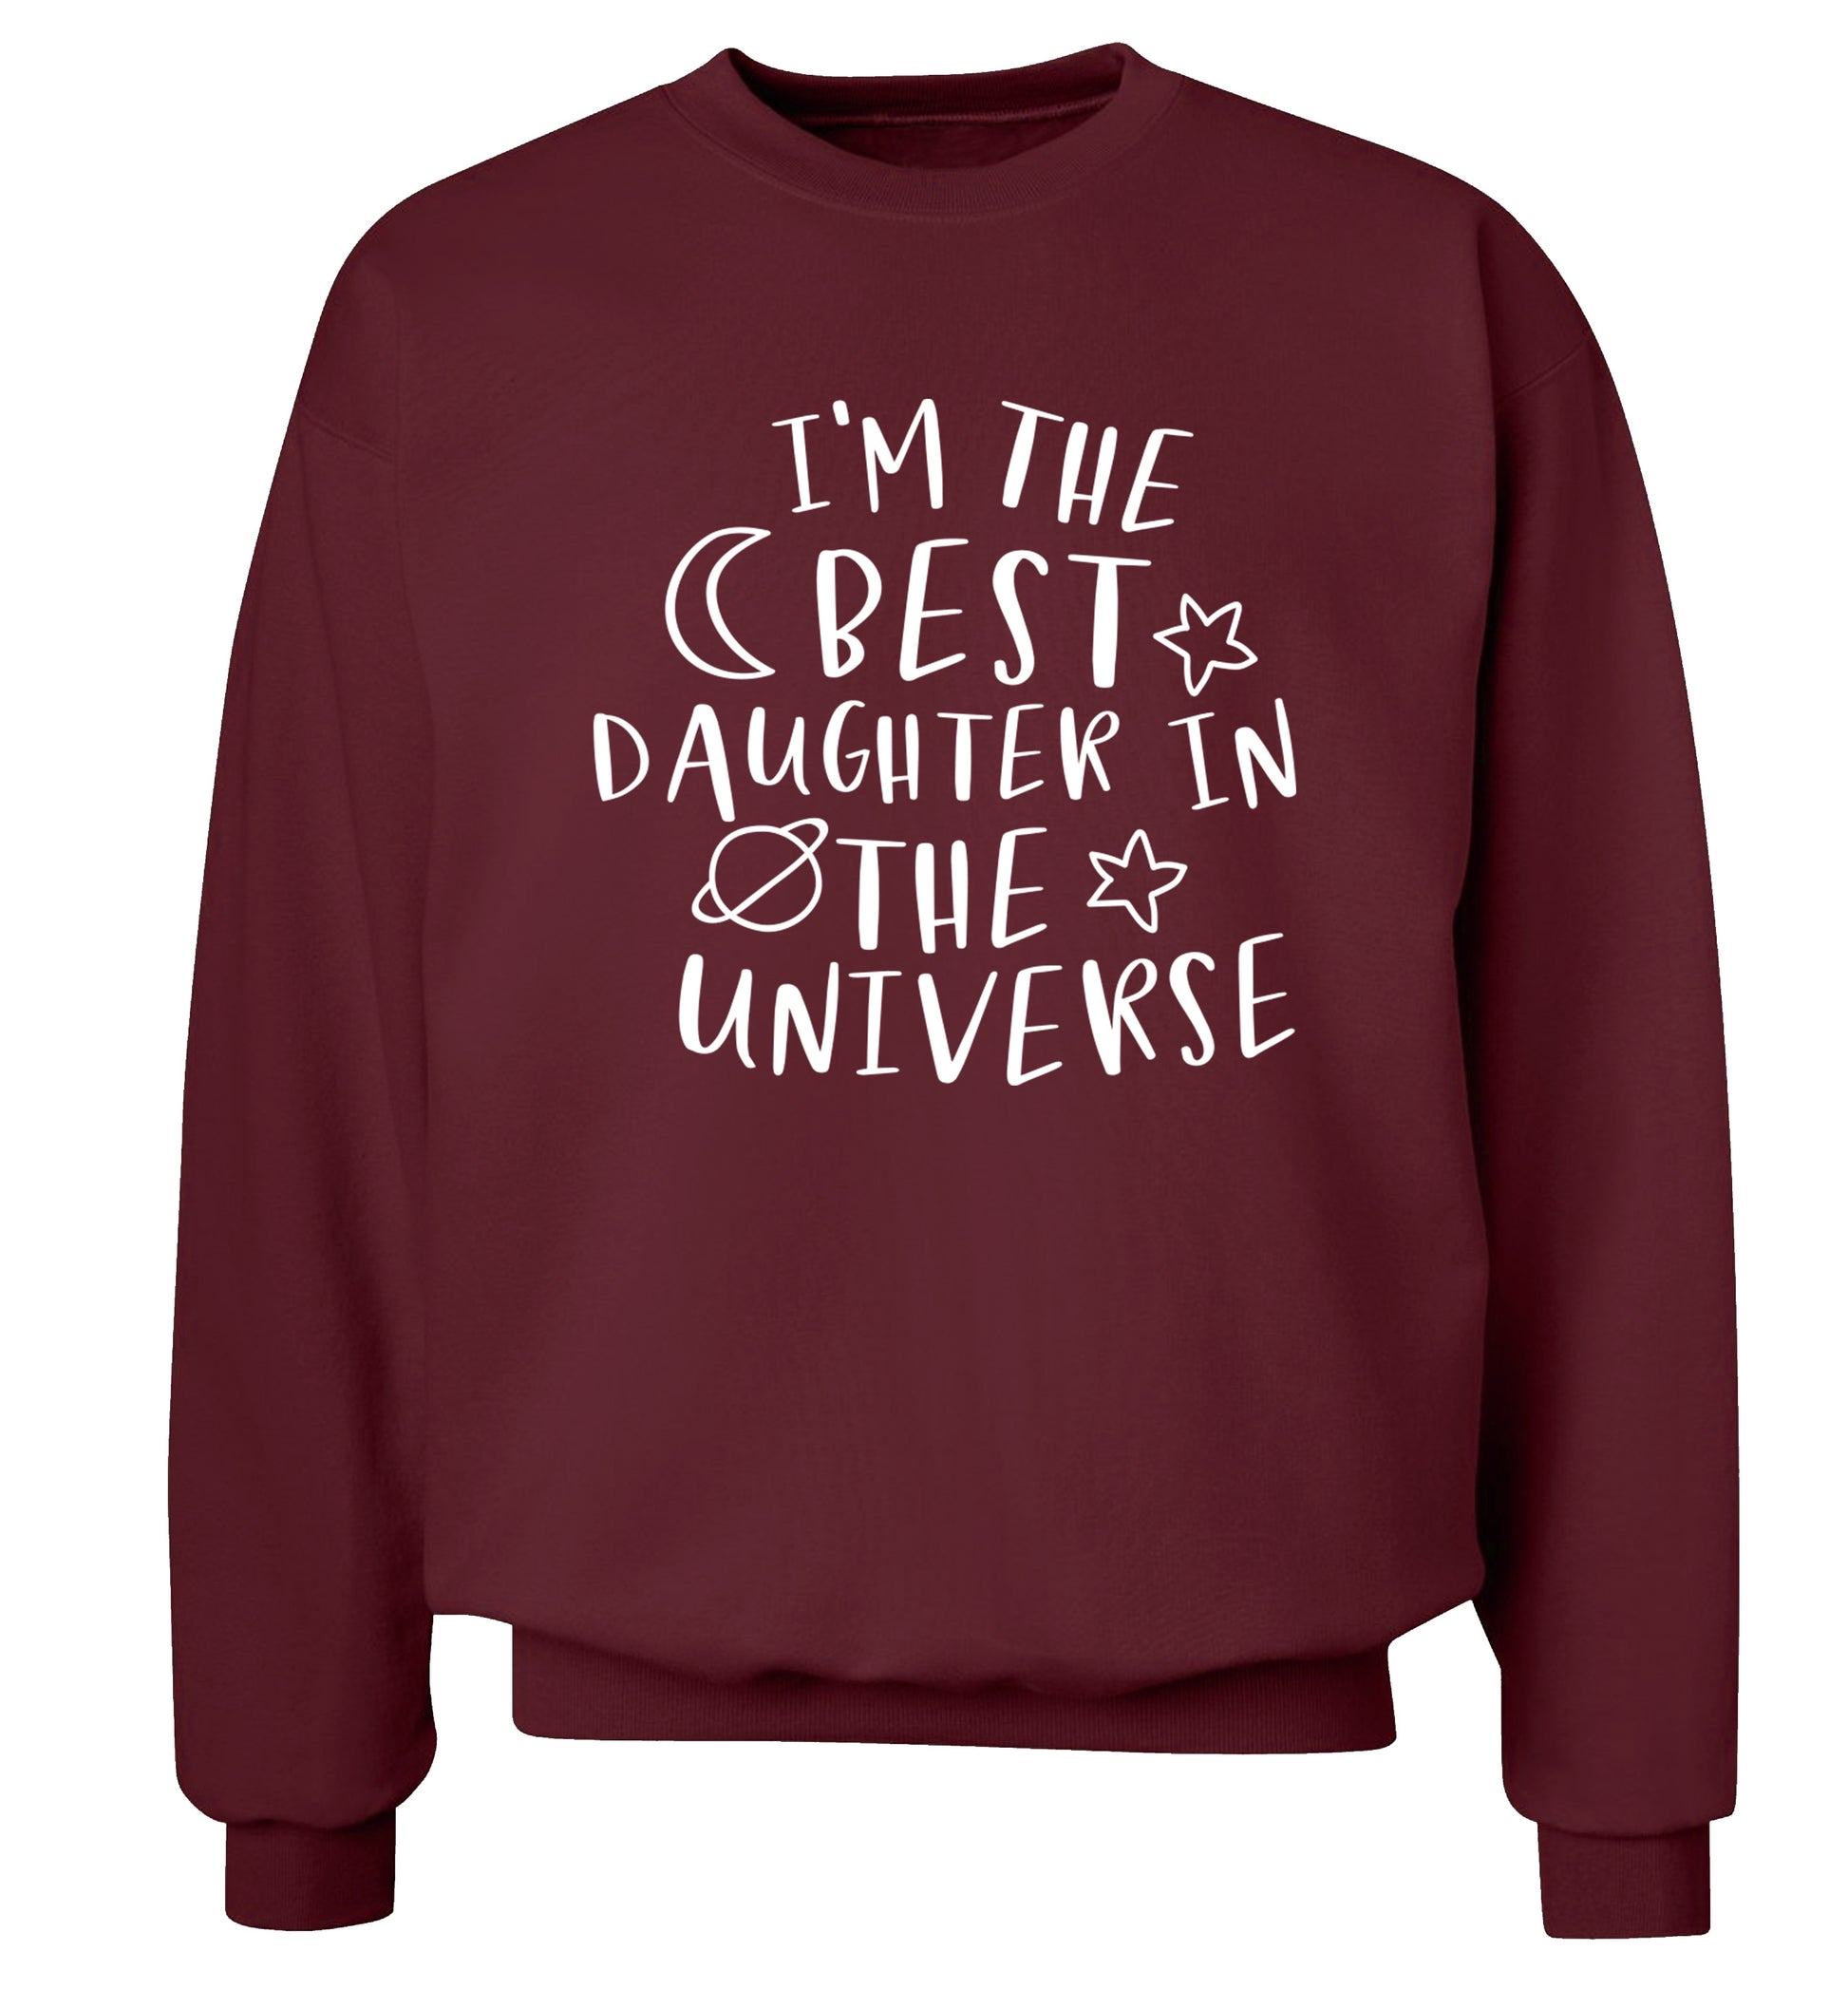 I'm the best daughter in the universe Adult's unisex maroon Sweater 2XL